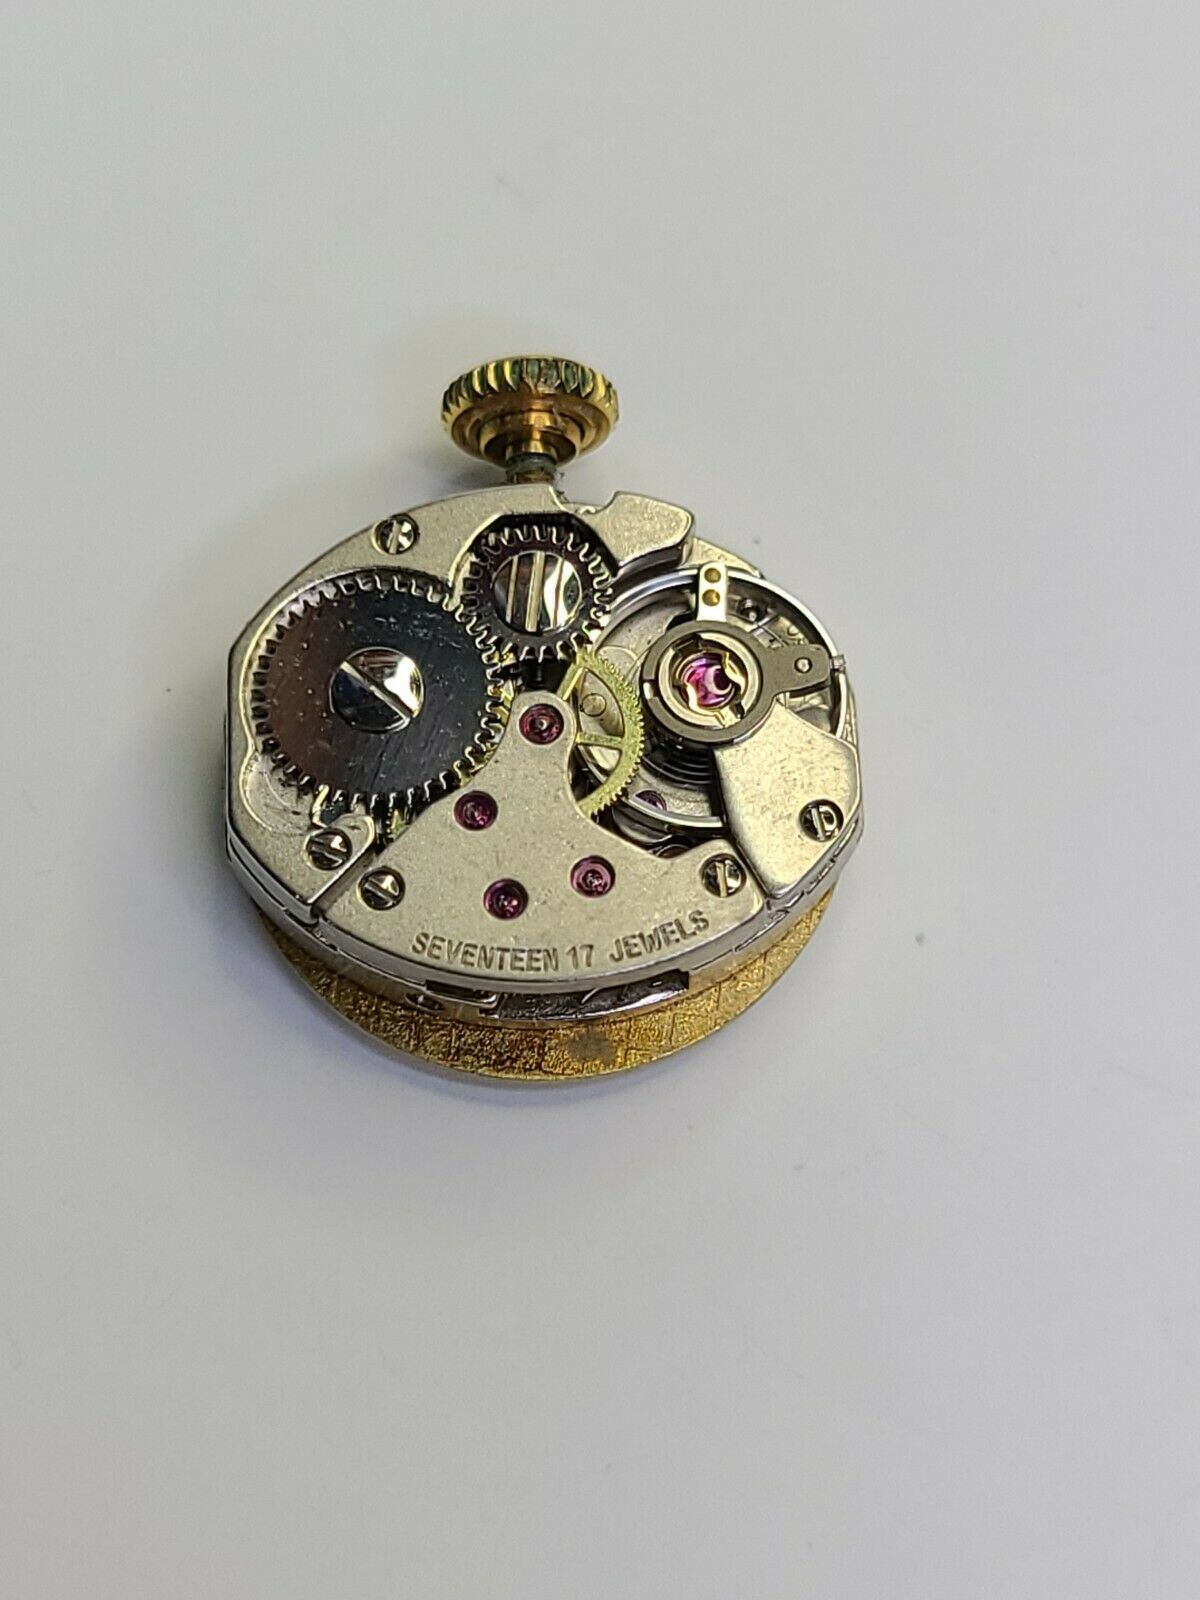 Stowa INT Caliber 1980 Watch Movement 17 Jewels with dial and hands